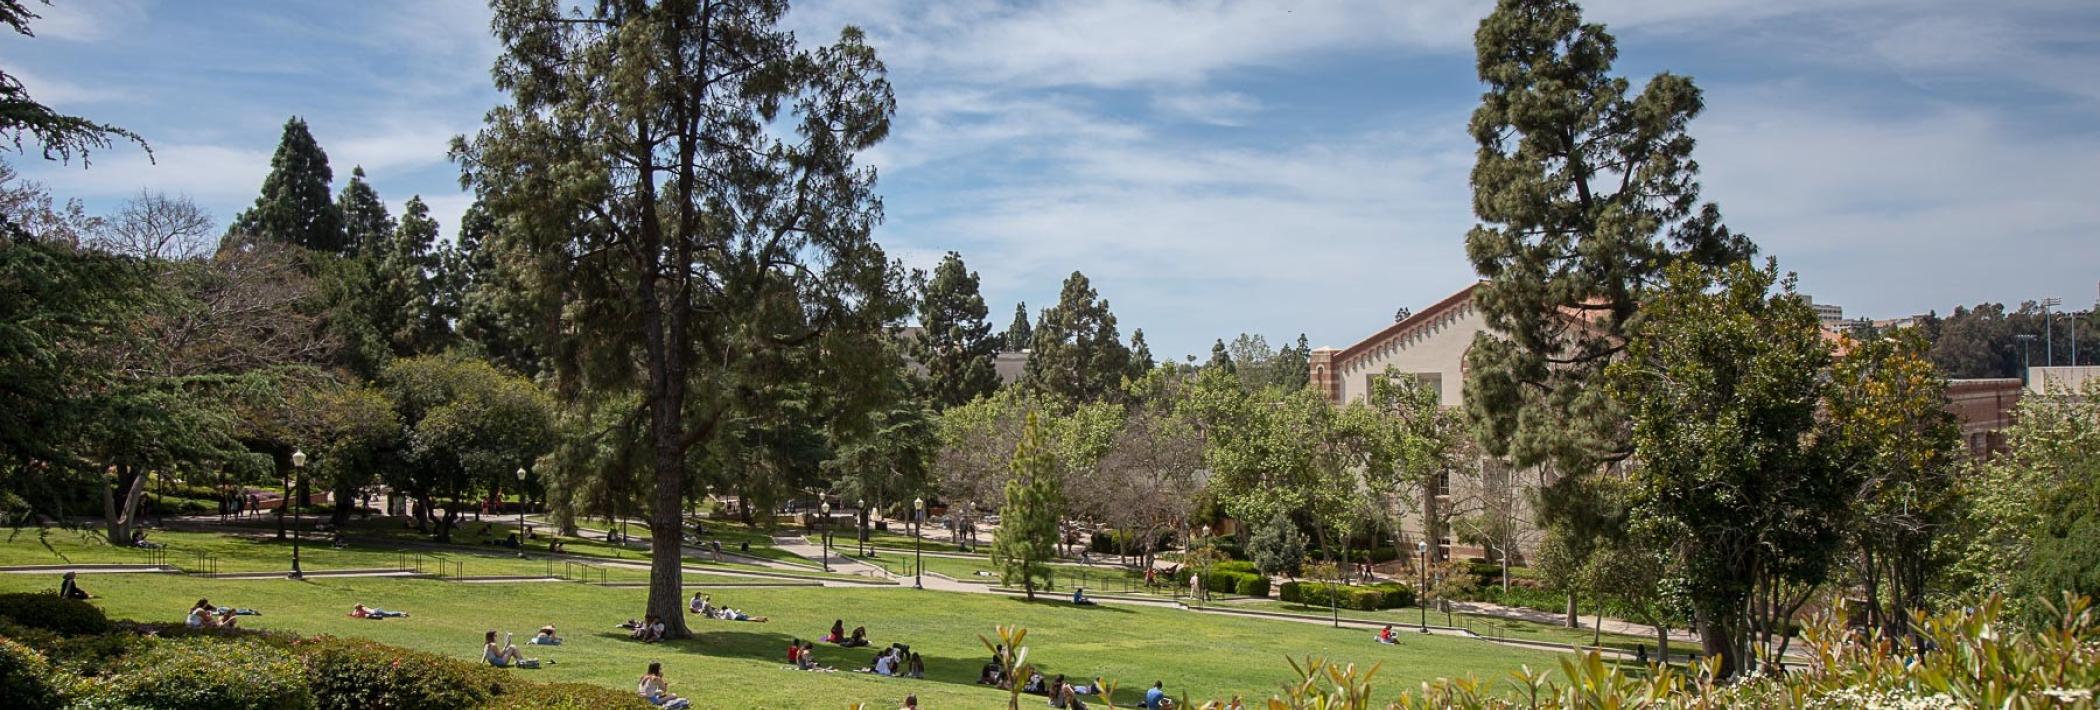 UCLA Quad with green grass and trees